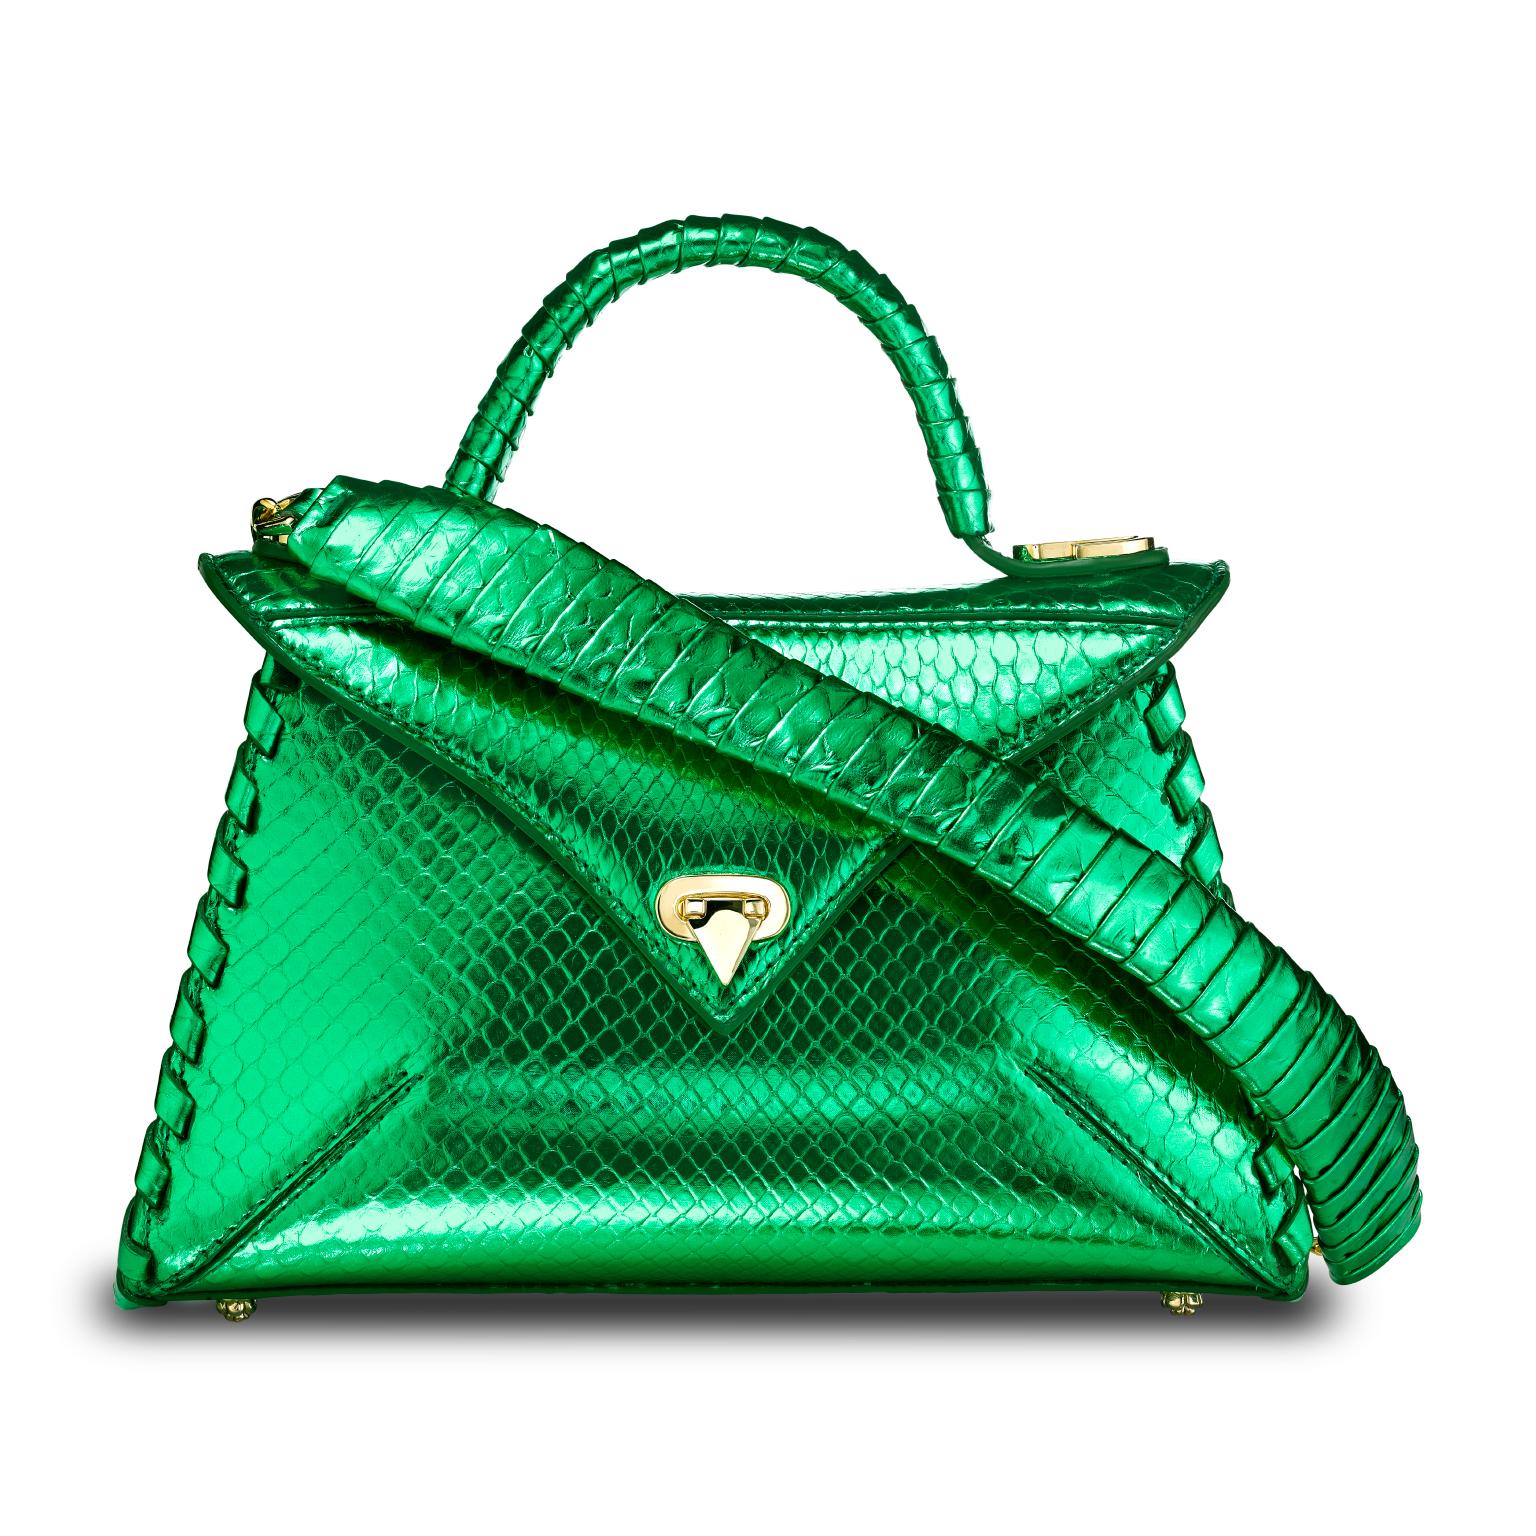 The LJ handbag small is featured in our Kryptonite Python with gold hardware. This semi-structured handbag has a triangular front-flap and our custom Spear-lock Closure. It is designed with a python-wrapped top-handle, handmade “whip-stitch” detail